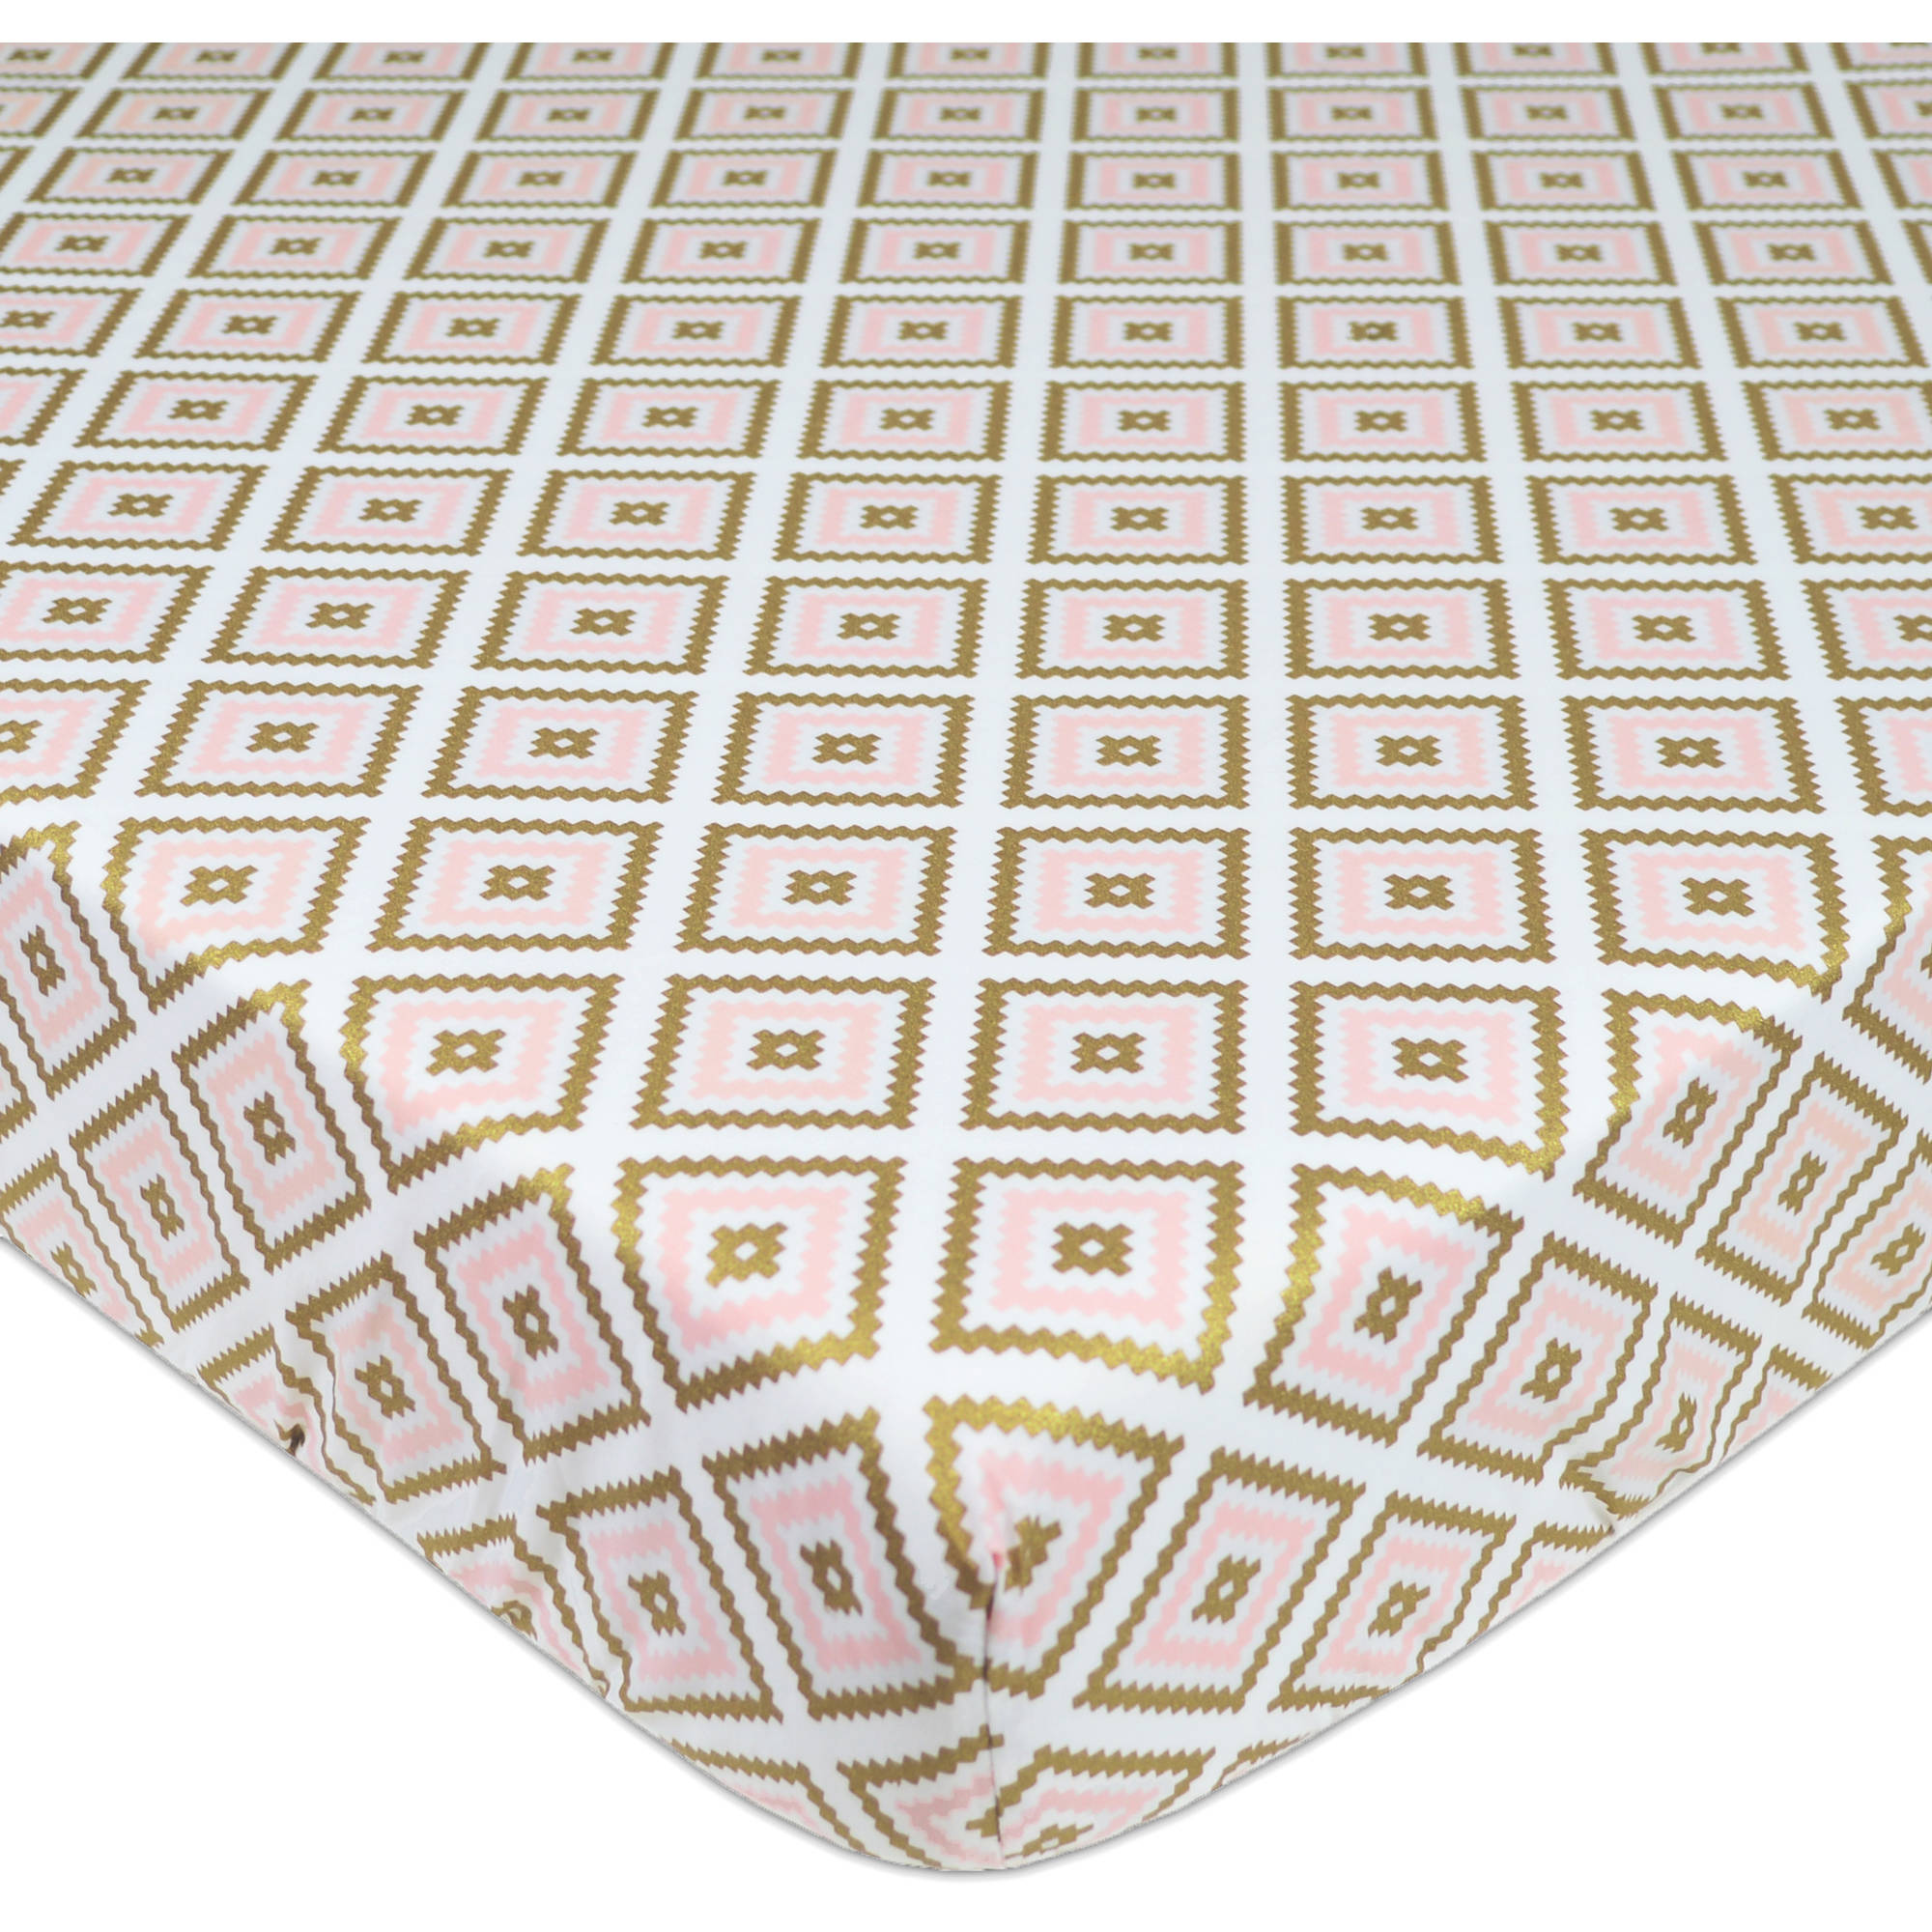 American Baby Co. Percale Cotton Fitted Crib Sheet, Gold/Pink Kilim - image 1 of 3